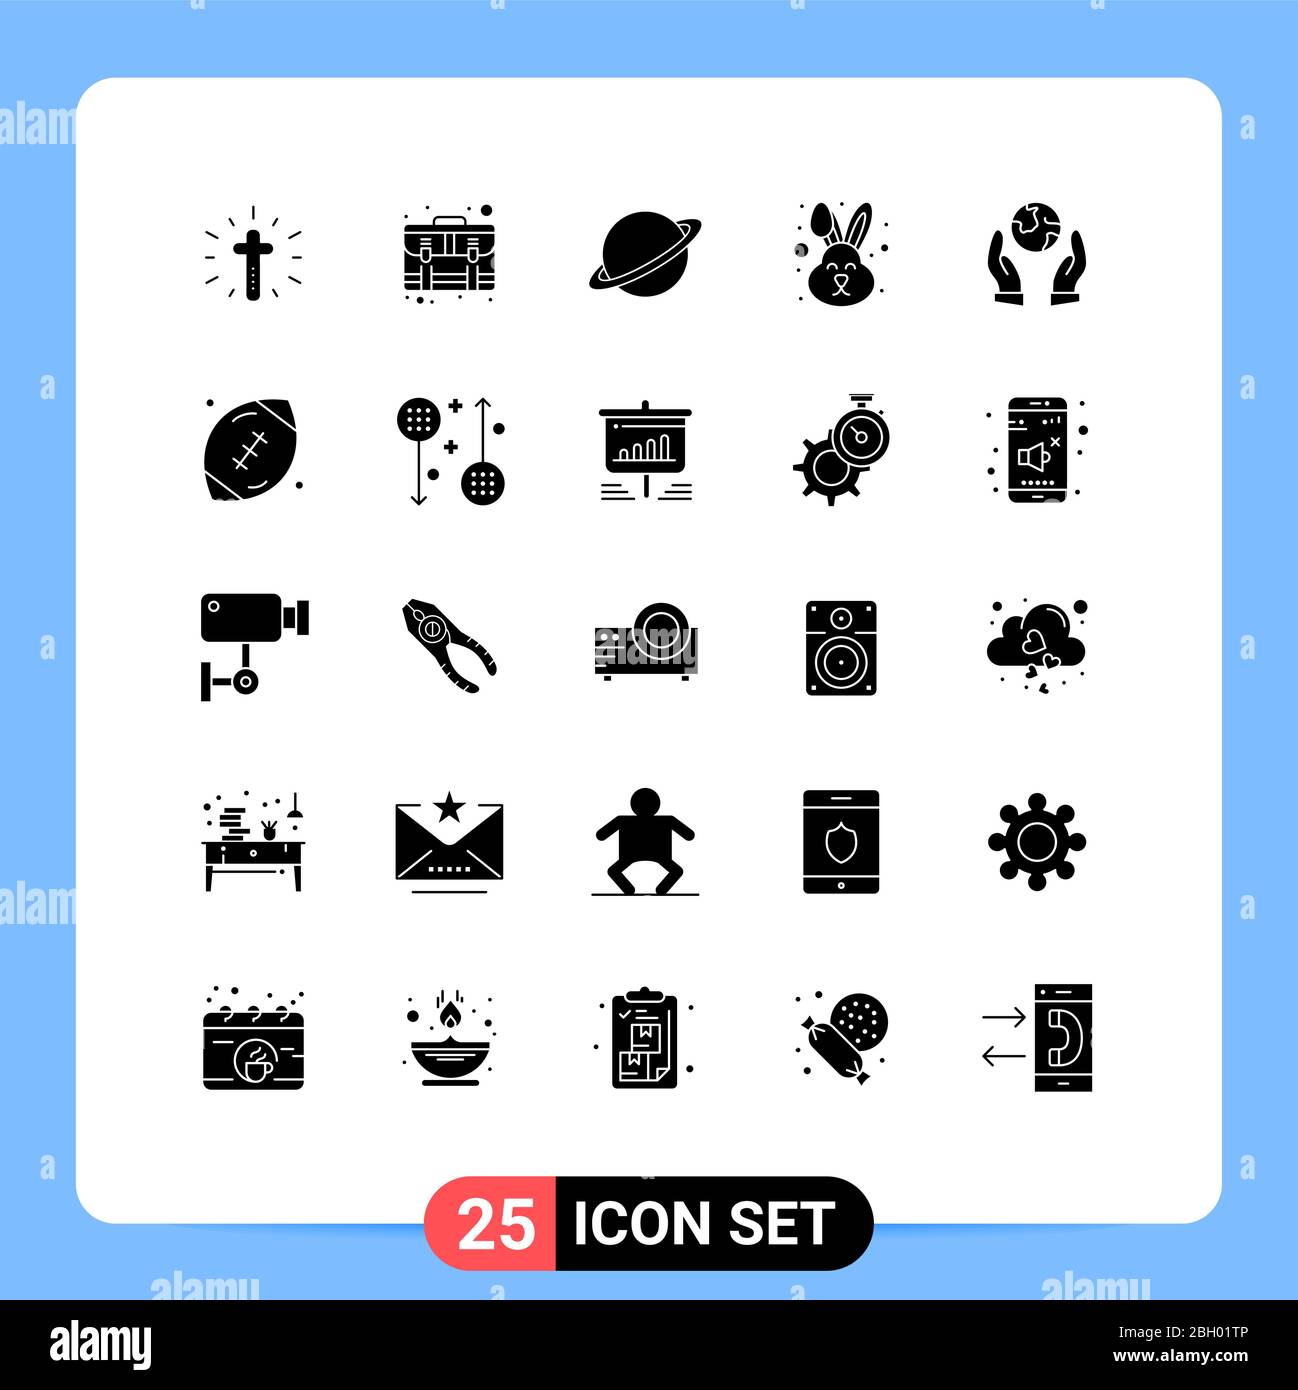 Set of 25 Modern UI Icons Symbols Signs for face, easter, payment, animal, flag Editable Vector Design Elements Stock Vector